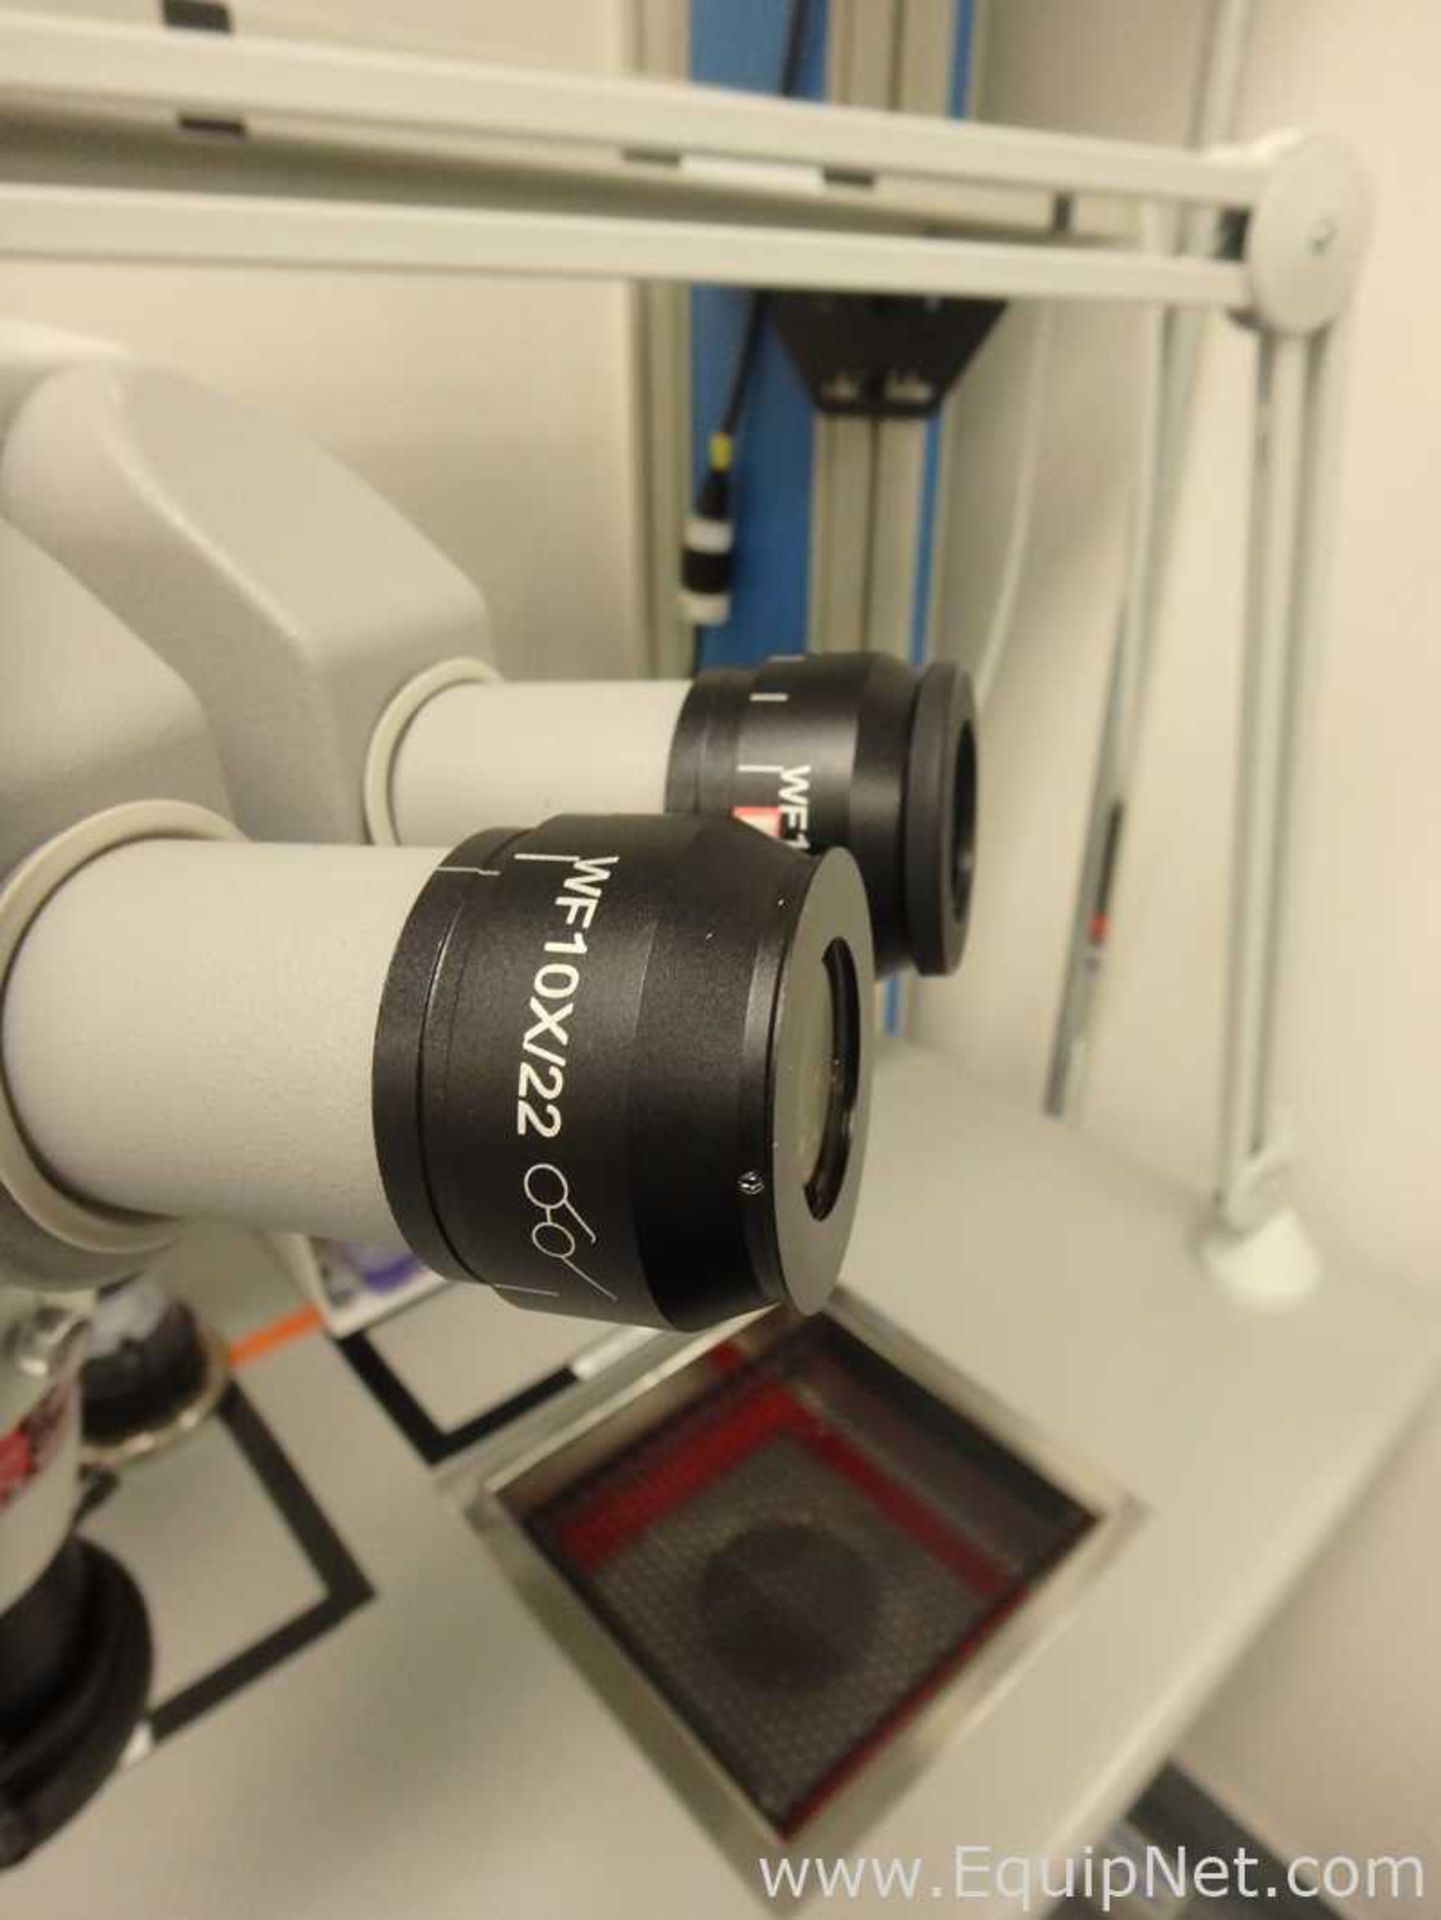 Boom Mounted Stereo Microscope - Image 5 of 10